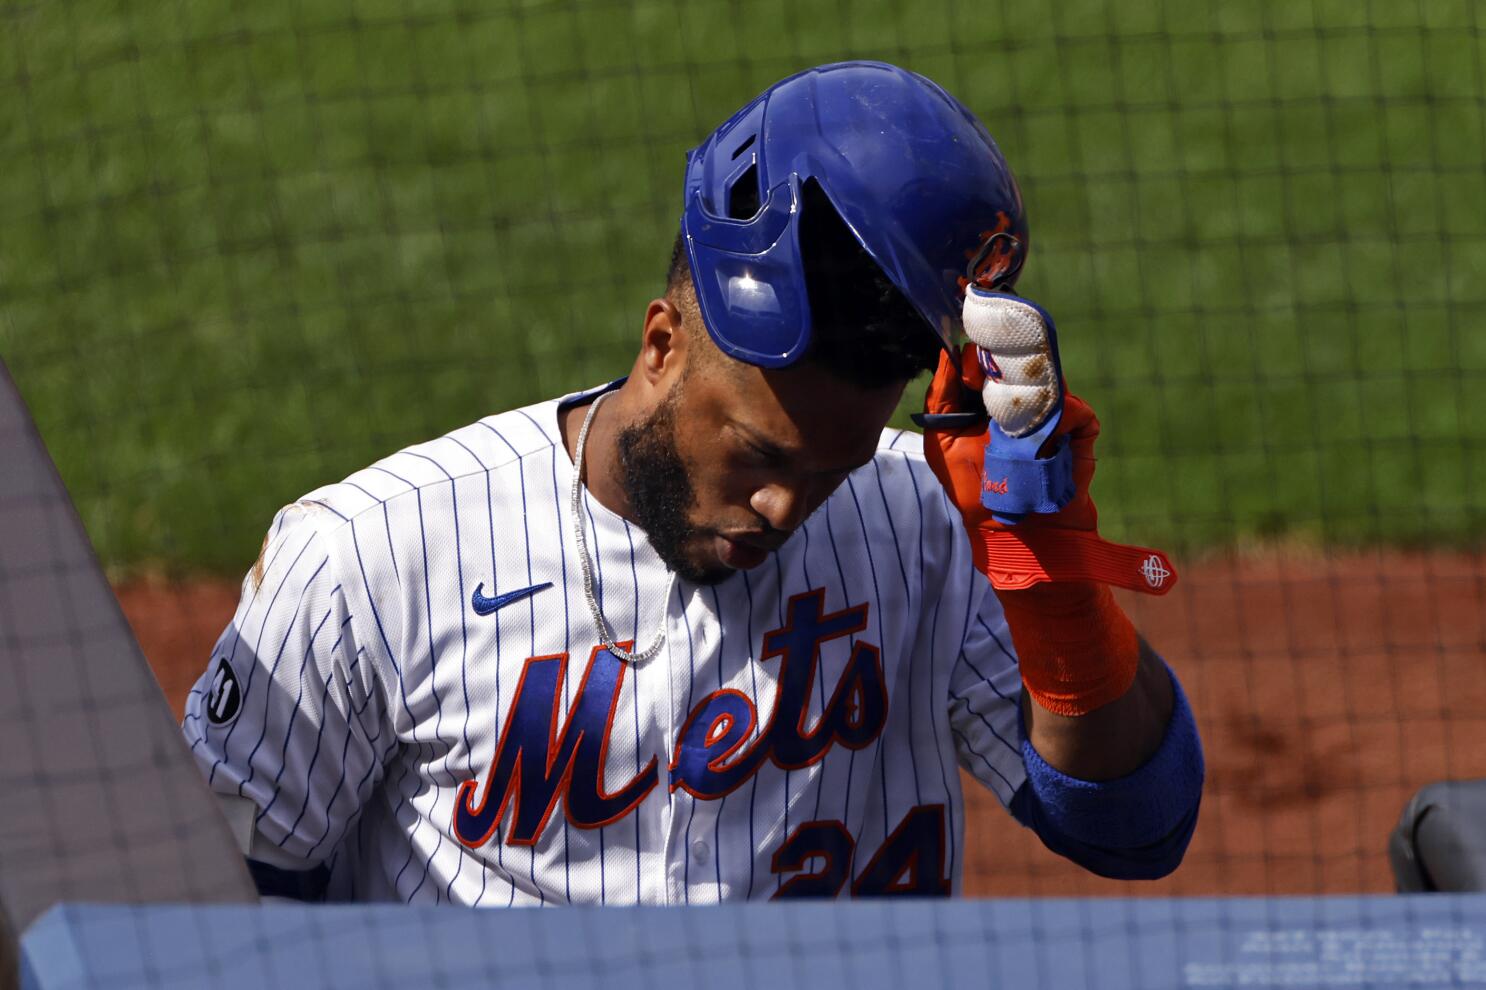 Mets Announce Acquisition Of Robinson Cano, Edwin Diaz - MLB Trade Rumors